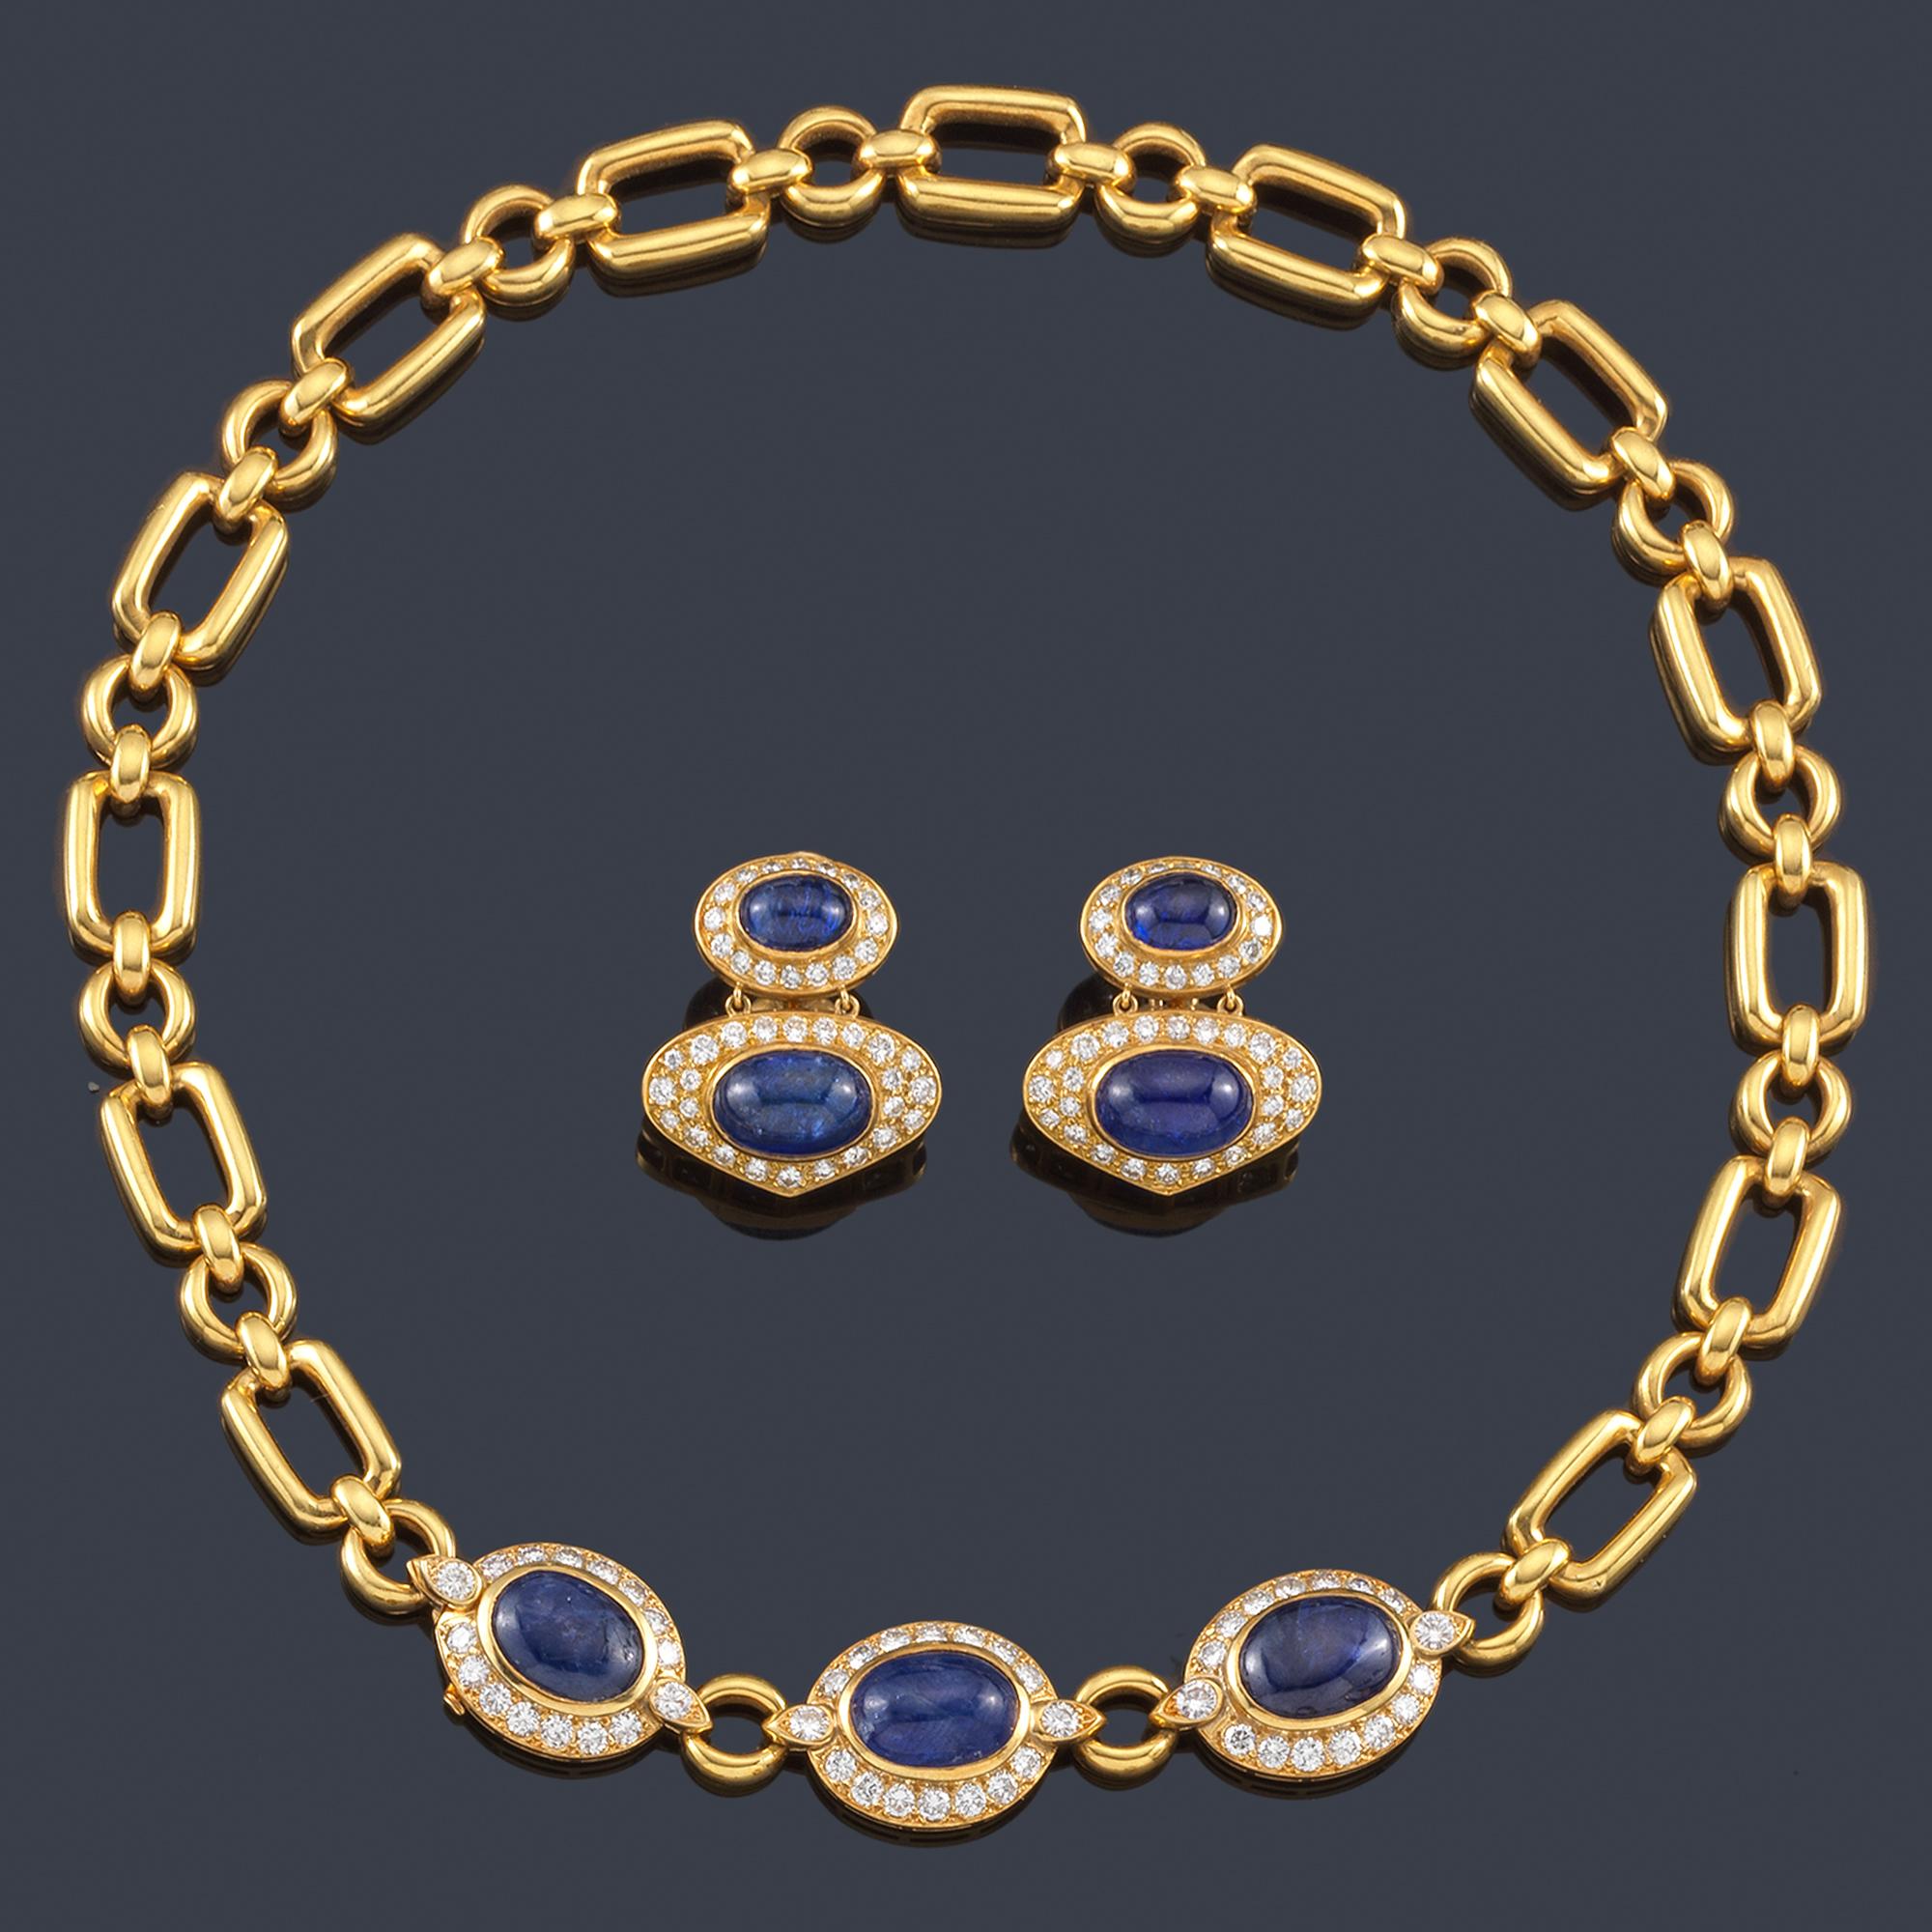 Van Cleef & Arpels Saphire Diamonds  and Yellow Gold Necklace and Earring Parure
Total Blue Saphire Cabouchon  19,17ct 
Diamonds  7,20ct  in 18k gold 
Length  17